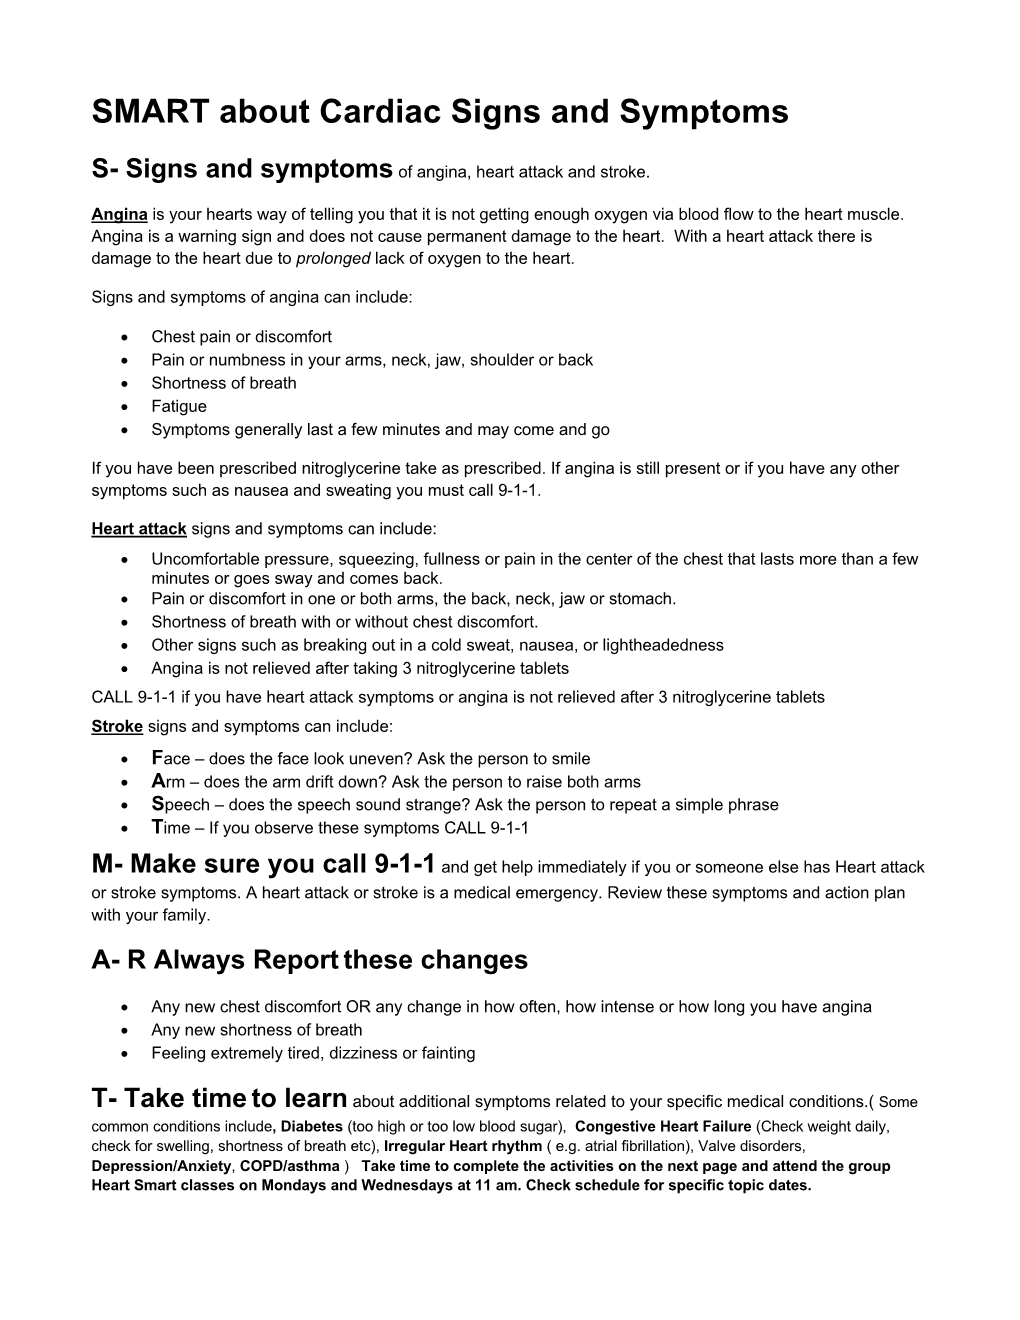 Smart About Symptoms to Keep